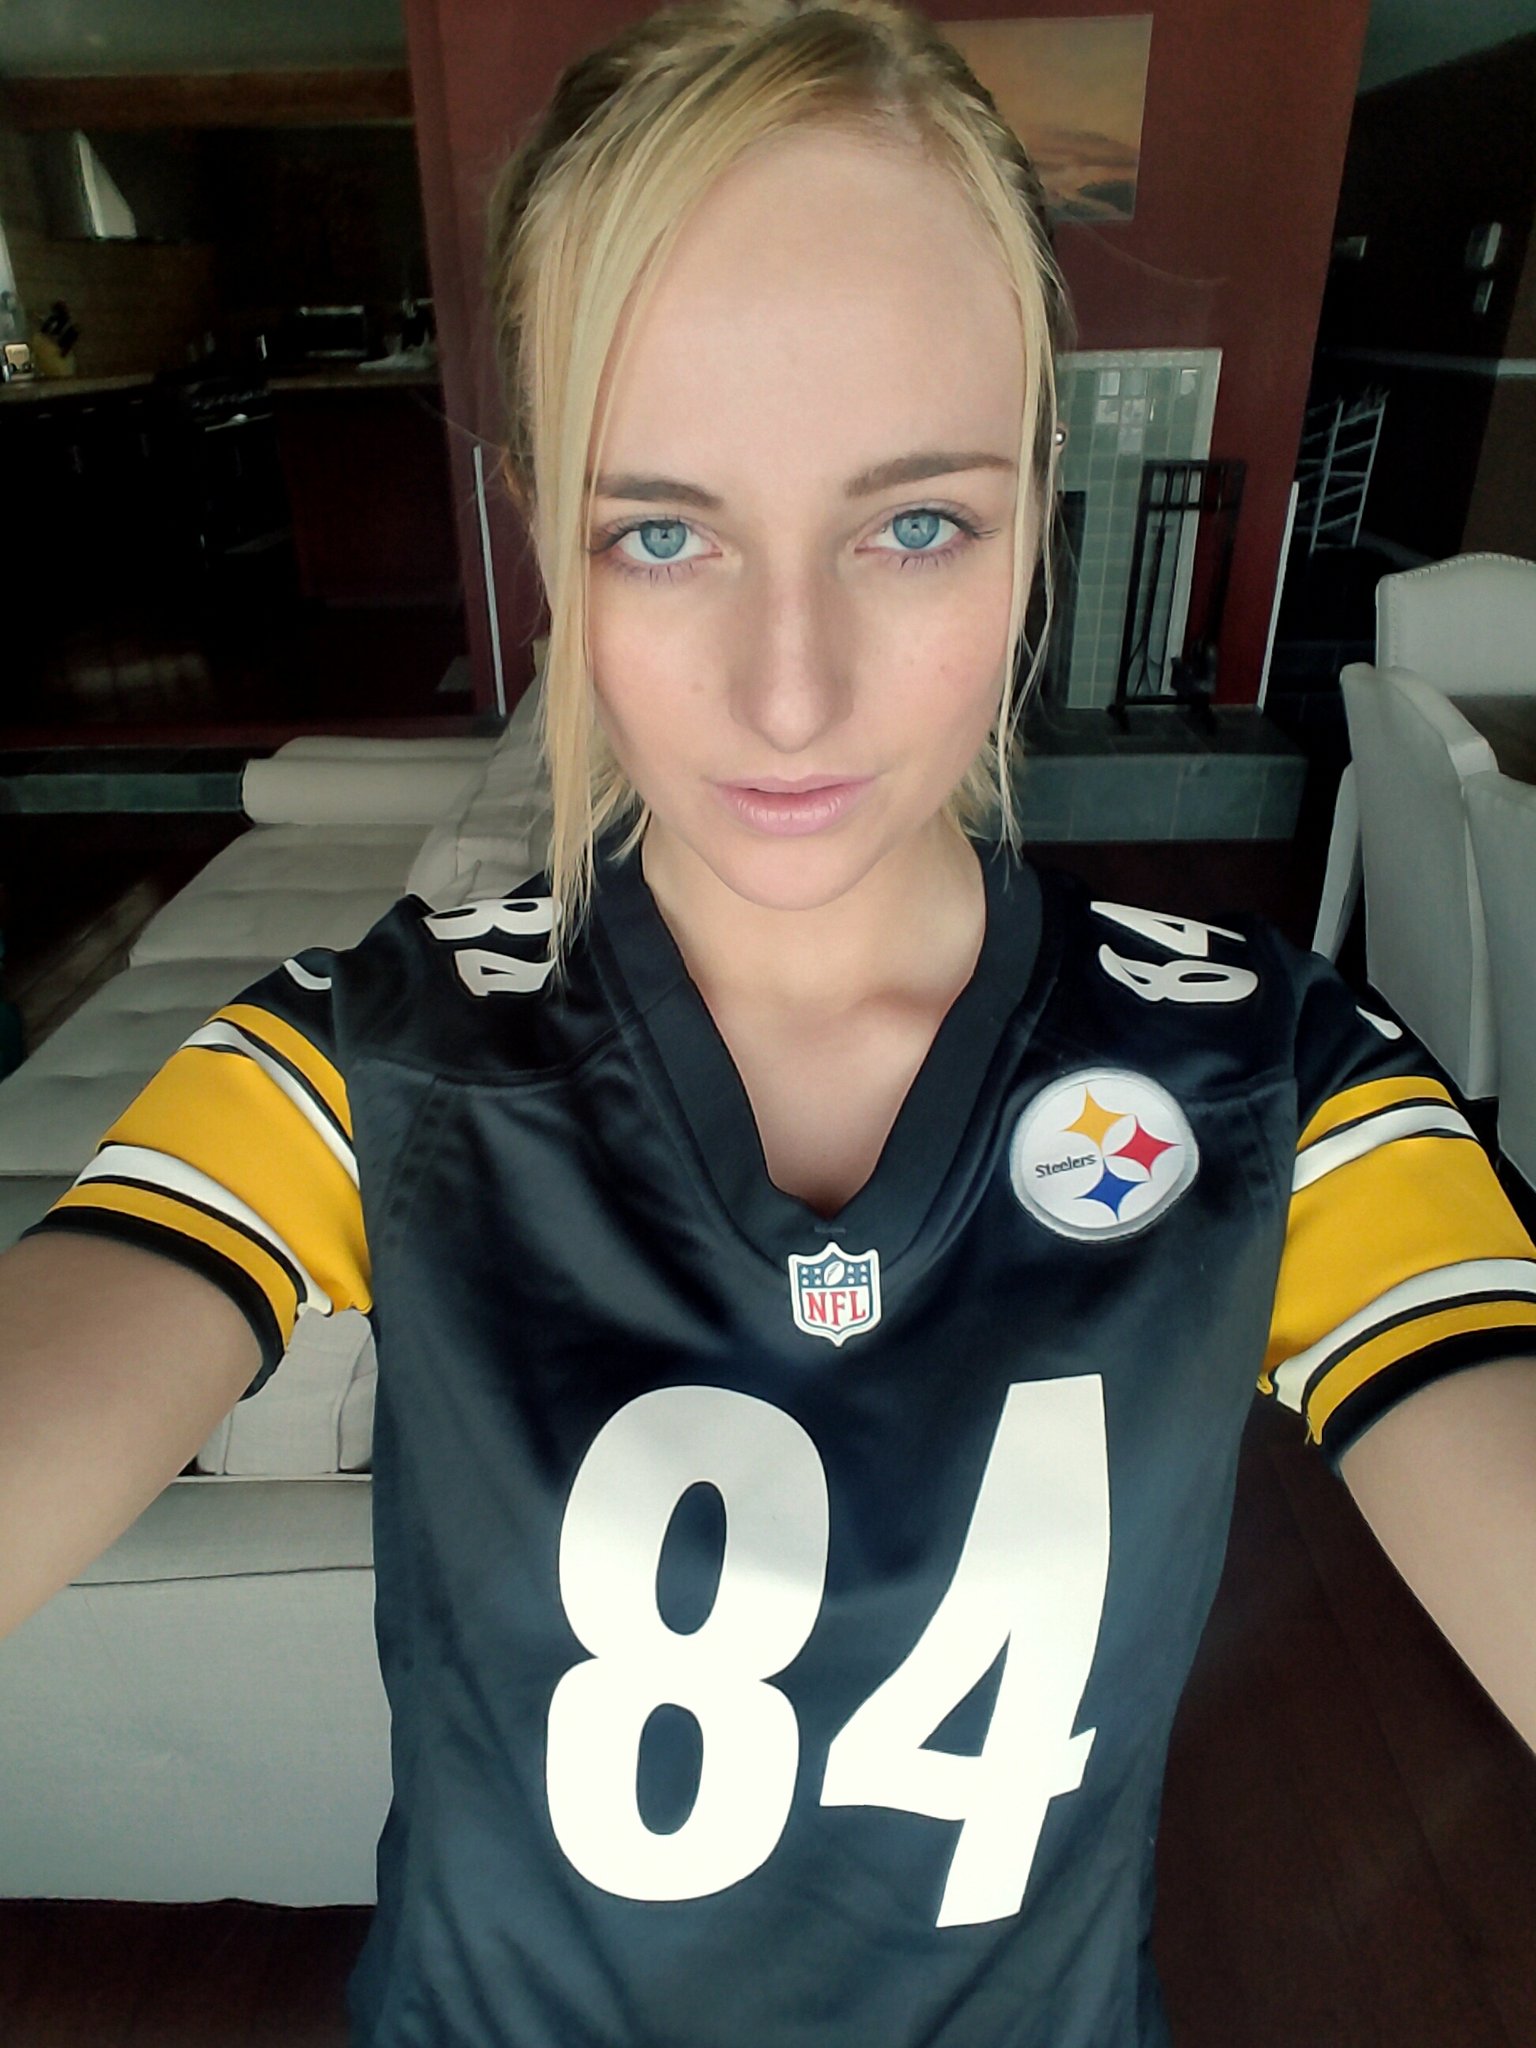 1 pic. This is it!!! We gotta win this game! #SteelersNation #GoSteelers #HereWeGo #antoniobrown #MyBoys